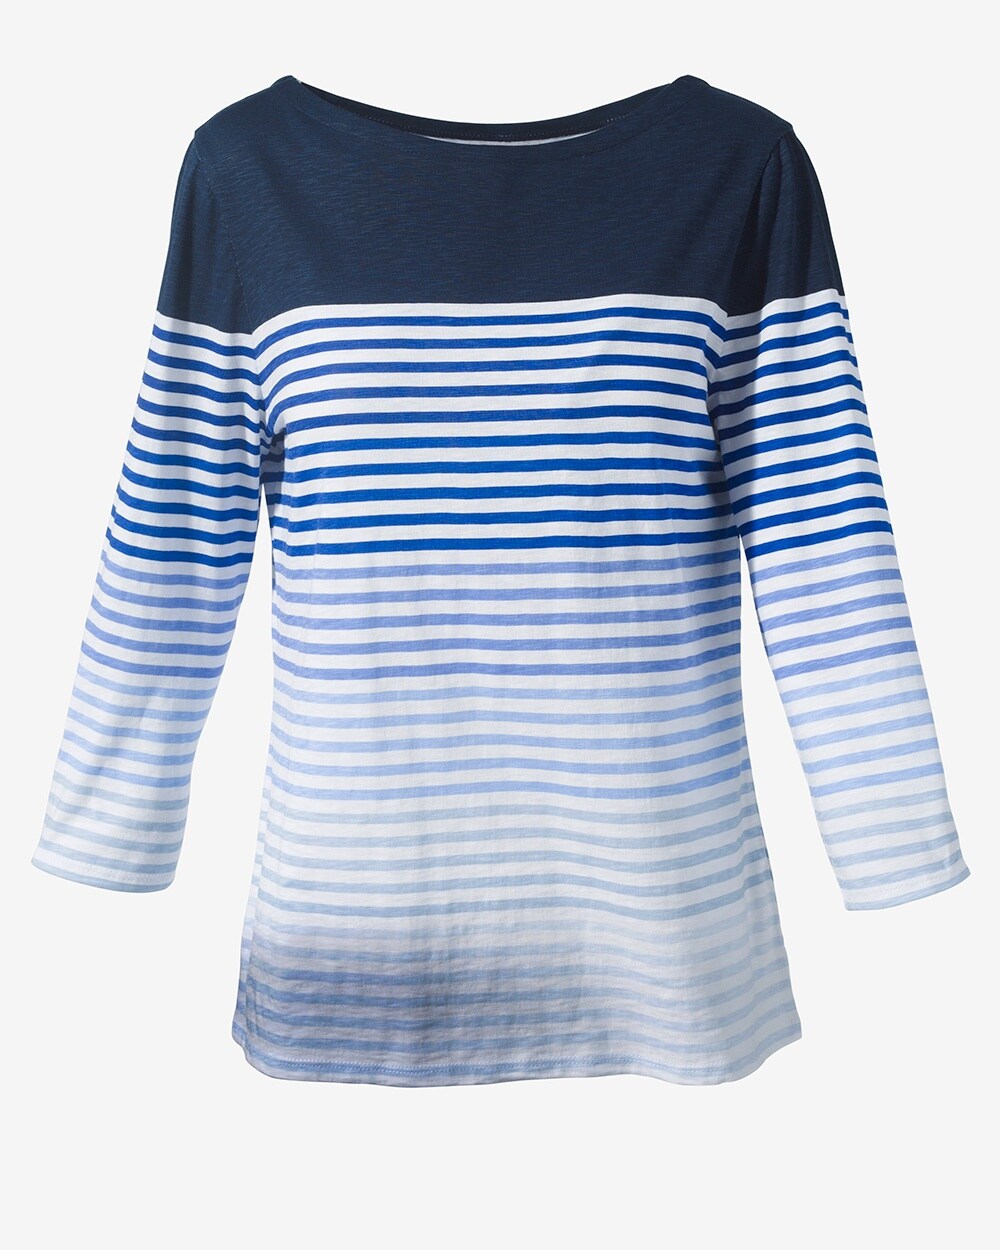 Prism Rays Boat-Neck 3/4-Sleeve Top